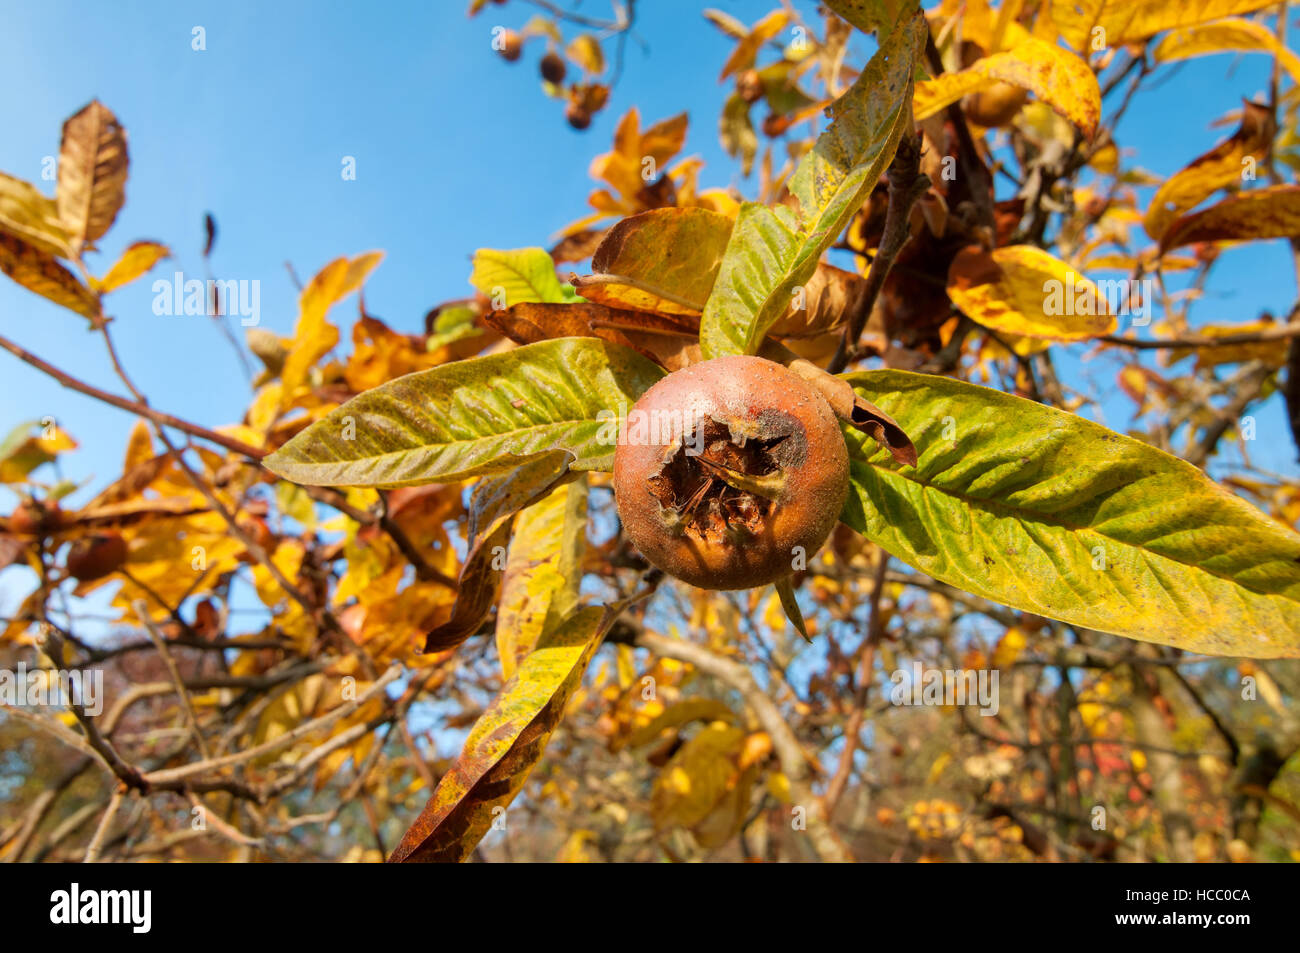 Ripe common medlar fruit with blue sky in the background Stock Photo